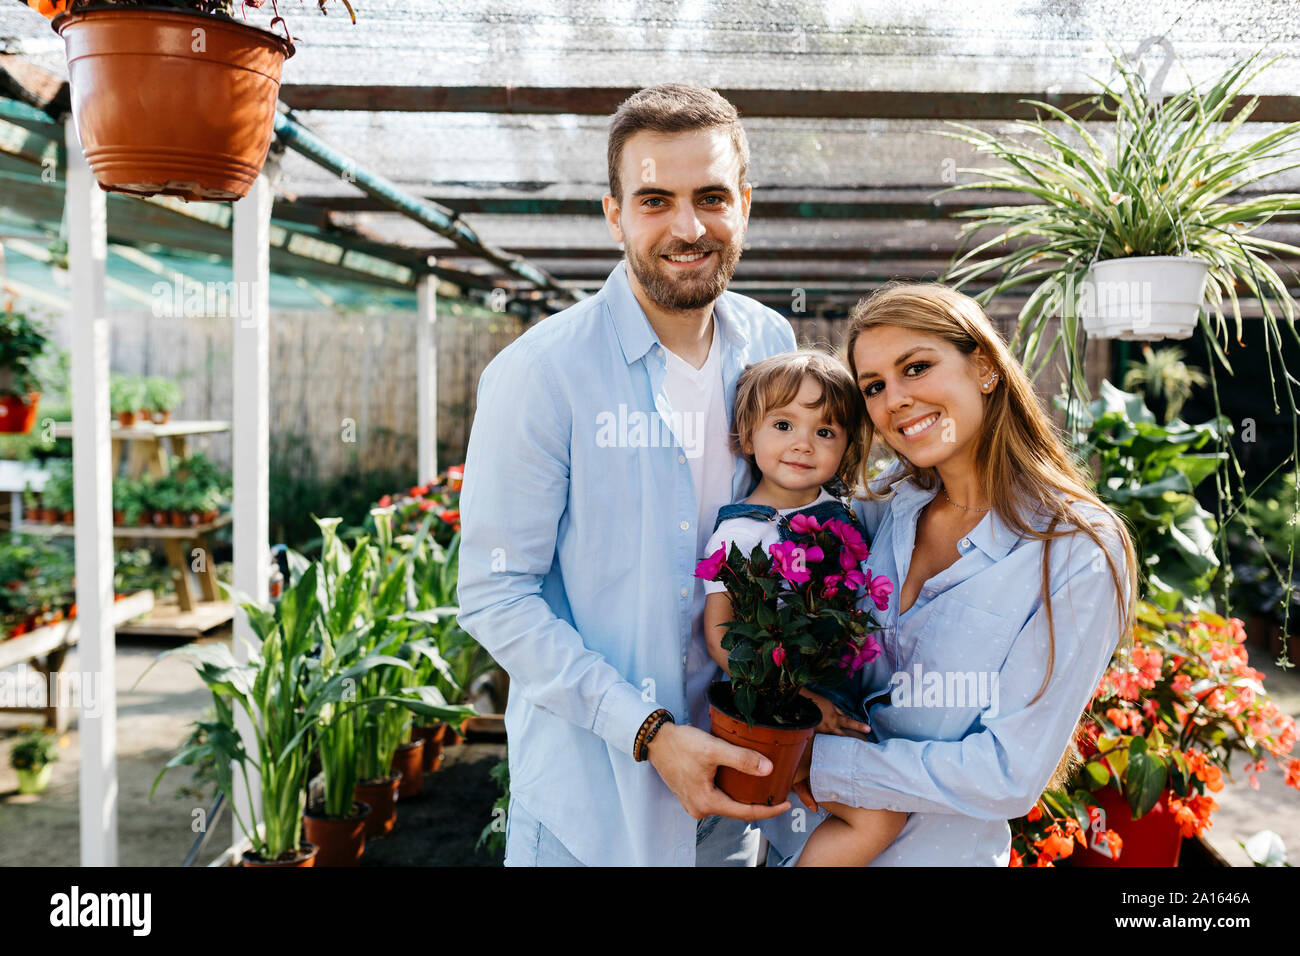 Portrait of happy mother, father and daughter buying flowers in a garden center Stock Photo